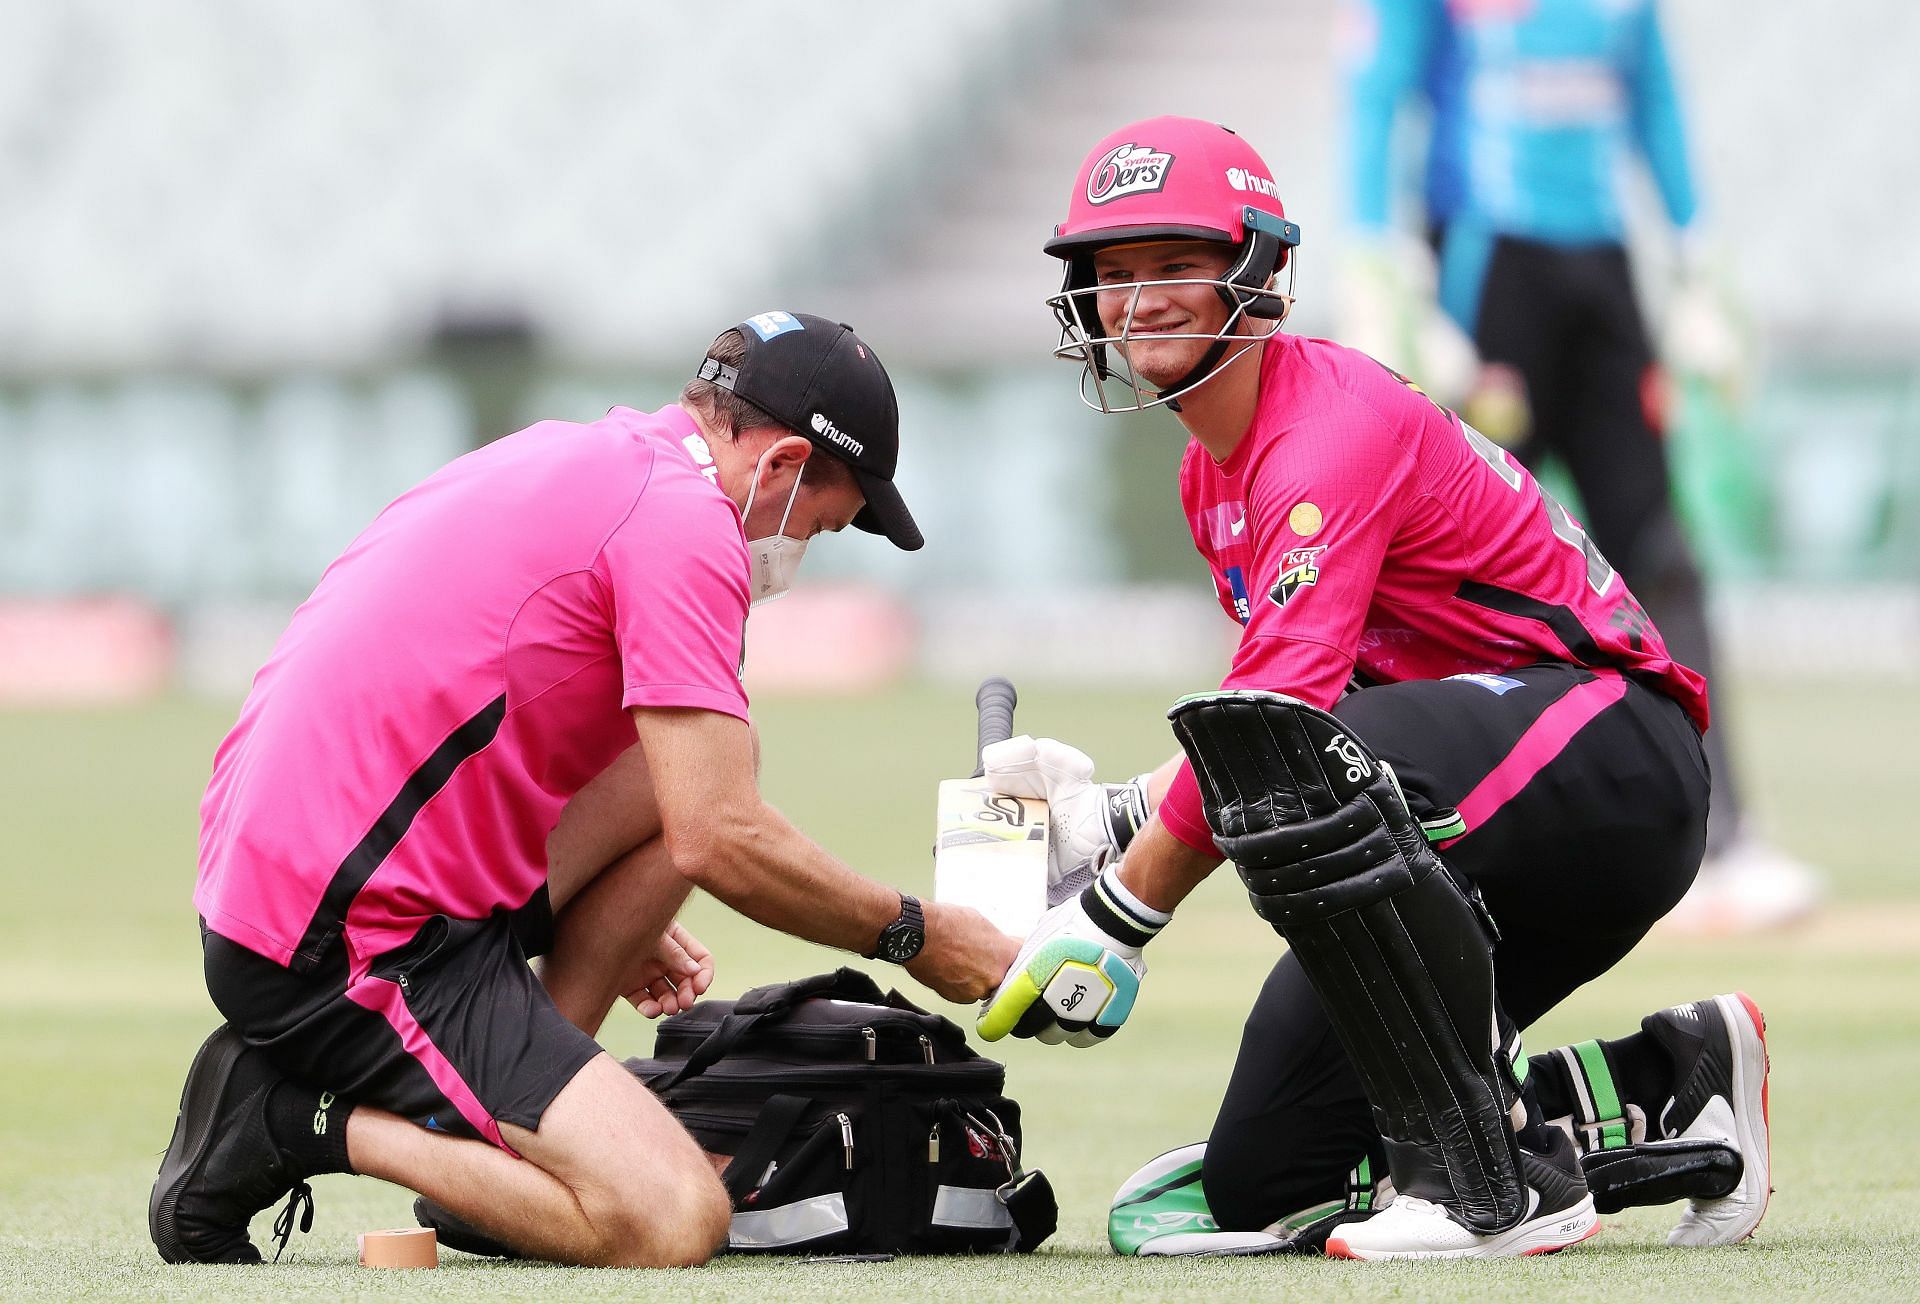 Big Bash League 21 22 Perth Scorchers Vs Sydney Sixers Probable Xis Match Prediction Pitch Report Weather Forecast And Live Streaming Details